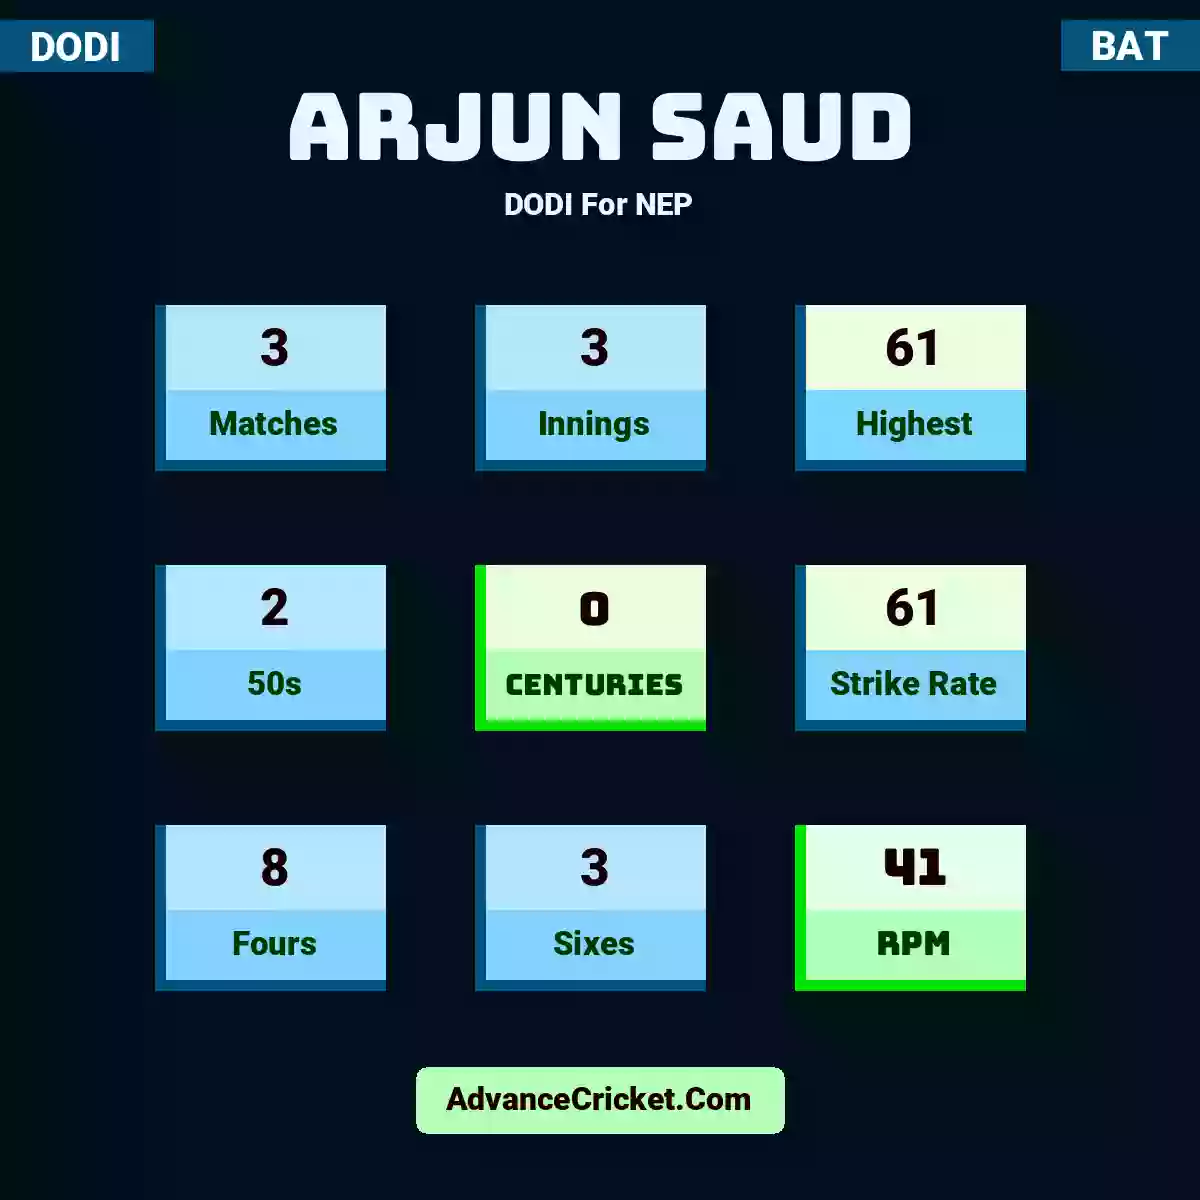 Arjun Saud DODI  For NEP, Arjun Saud played 3 matches, scored 61 runs as highest, 2 half-centuries, and 0 centuries, with a strike rate of 61. A.Saud hit 8 fours and 3 sixes, with an RPM of 41.